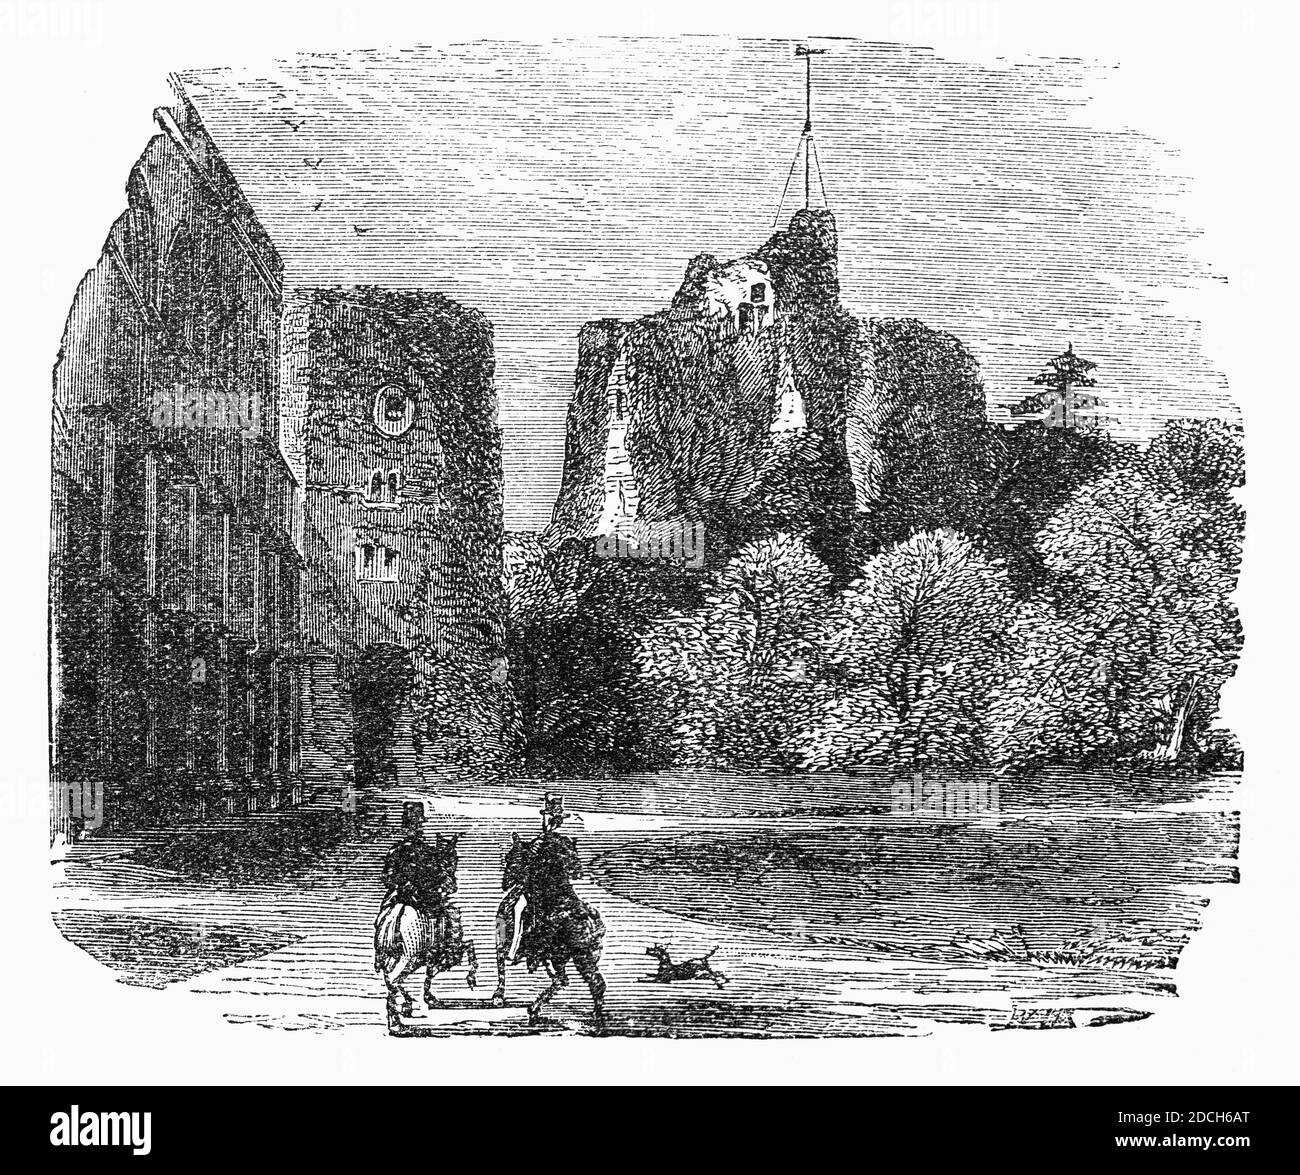 A 19th Century view of the keep in Arundel Castle in Arundel, West Sussex, England. It was established by Roger de Montgomery in 1067, the first to hold the earldom of Arundel by the graces of William the Conqueror. The castle was damaged in the English Civil War and then restored in the 18th and 19th centuries by Charles Howard the 11th Duke of Norfolk. Stock Photo